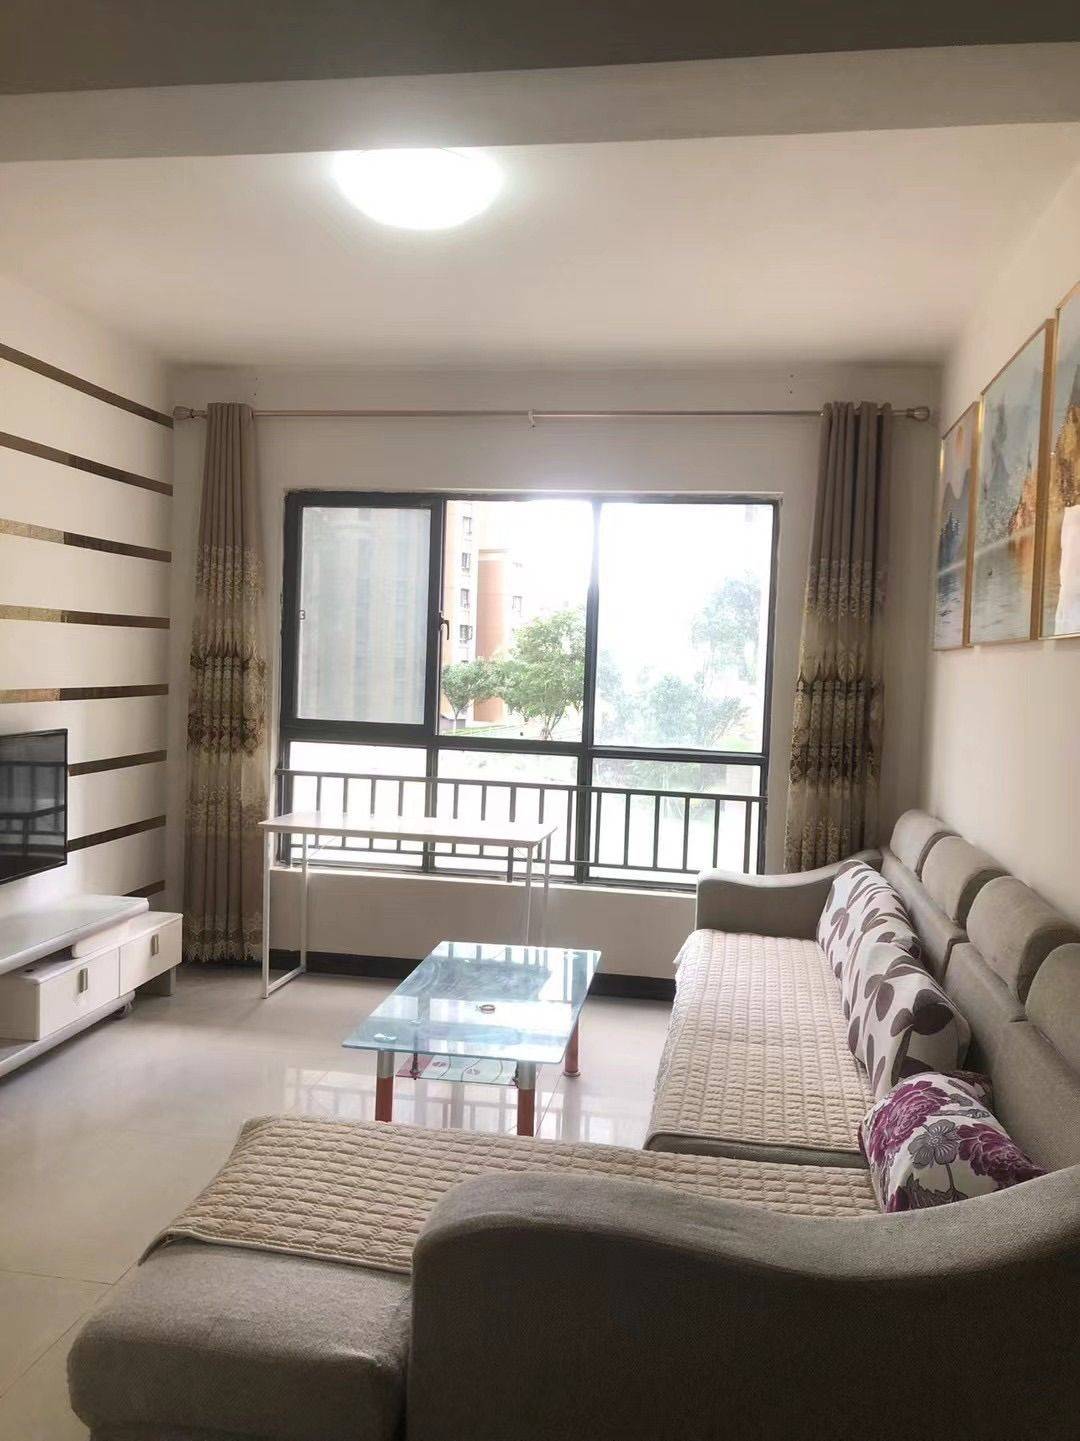 Kunming-Chenggong-Cozy Home,Clean&Comfy,“Friends”,Chilled,LGBTQ Friendly,Pet Friendly